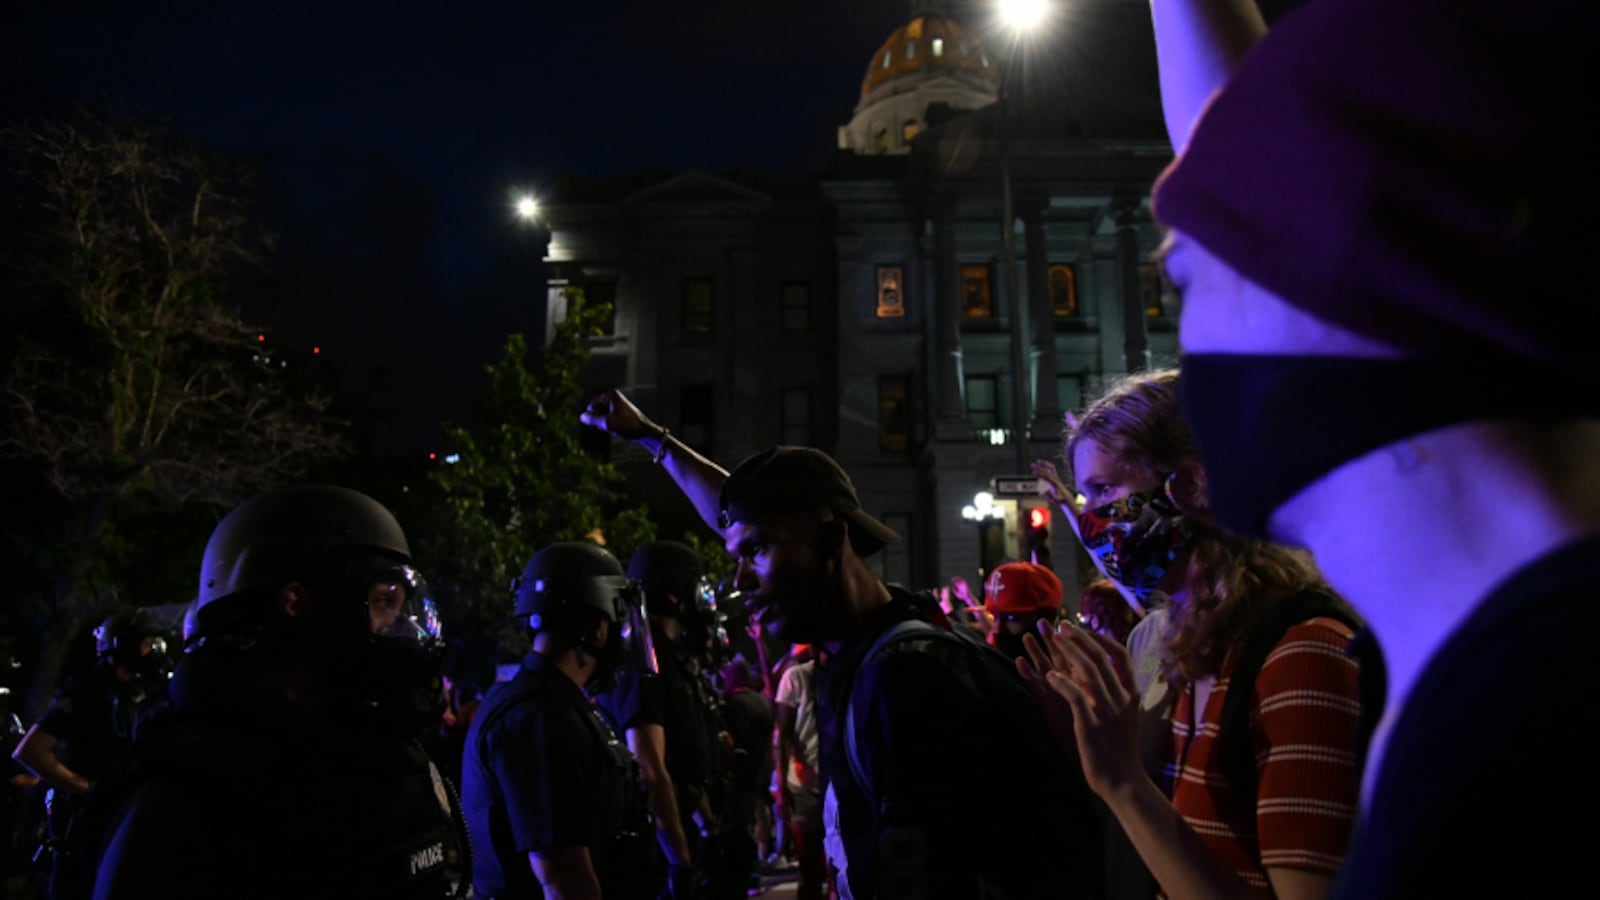 Demonstrators protesting the death of George Floyd at the hands of Minneapolis police face off with Denver Police officers outside the Colorado Capitol. A blue light highlights the faces of all on the scene.